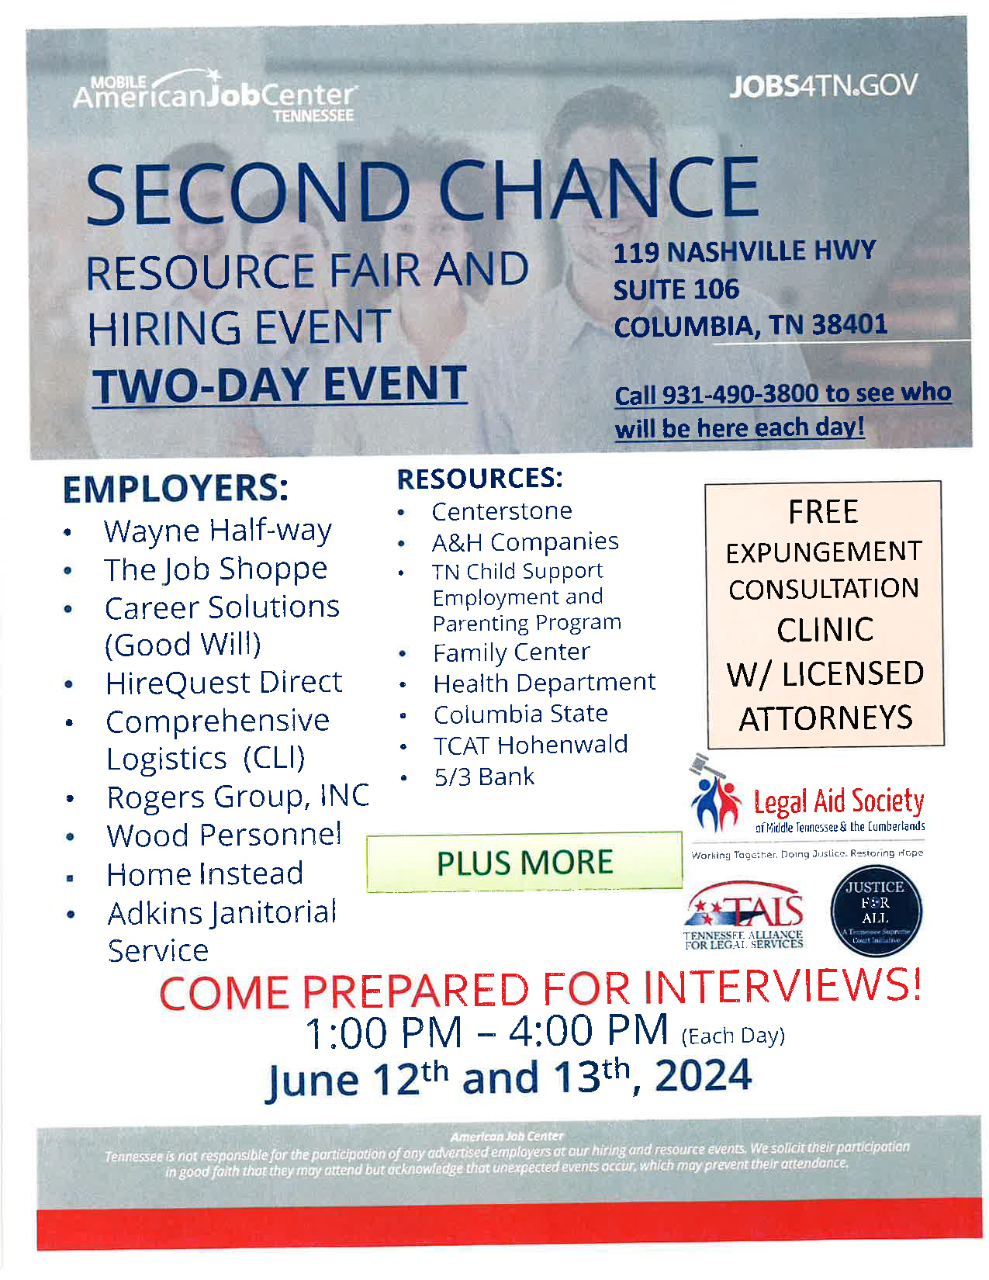 The Second Chance Resource Fair and Hiring Event is June 12-13